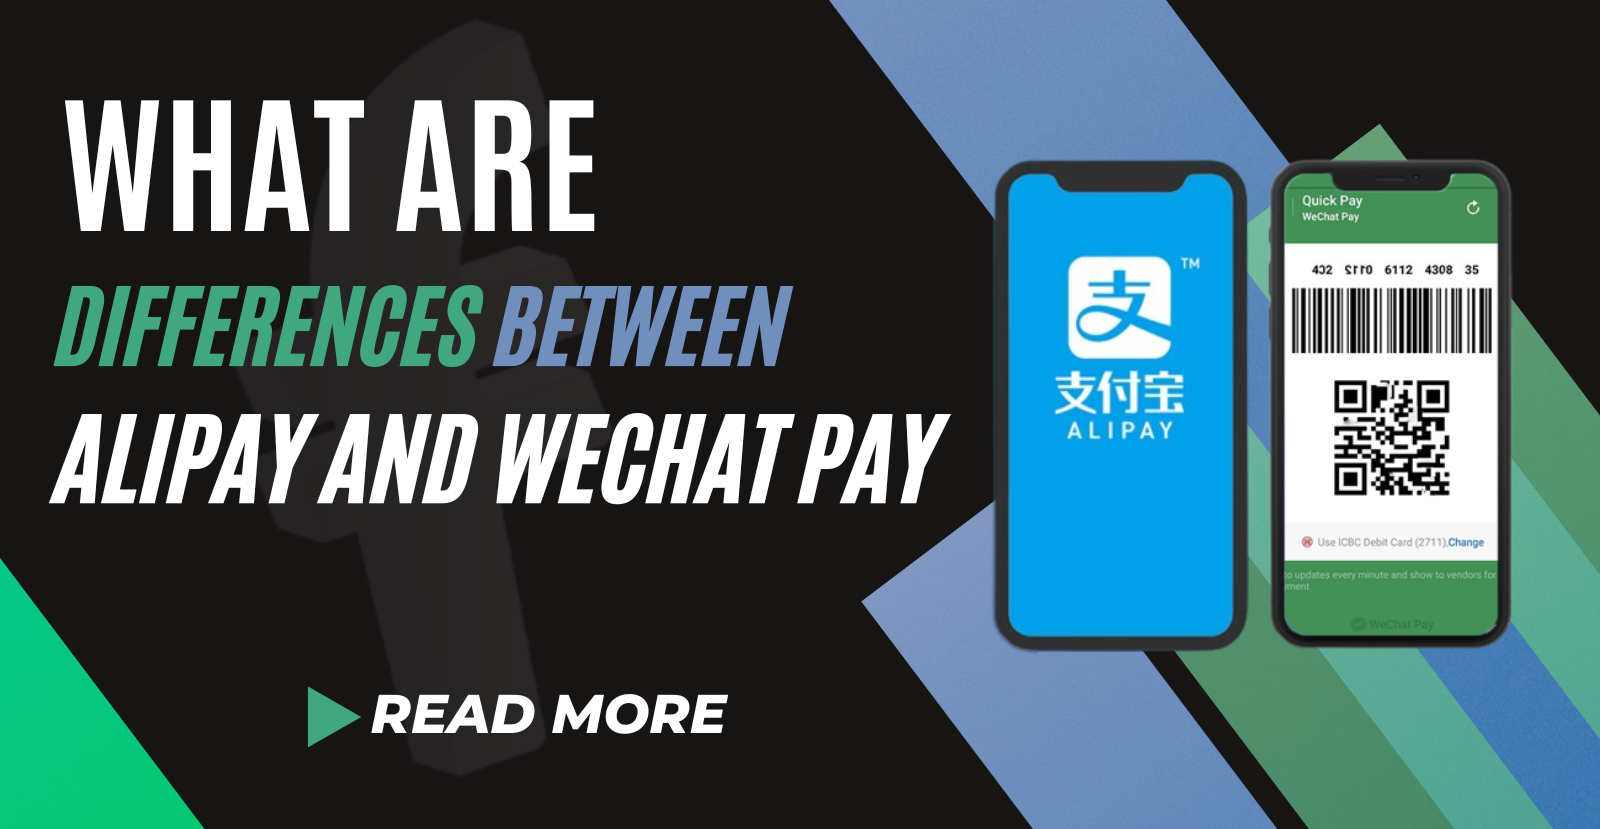 What difference between Alipay and WeChat Pay?